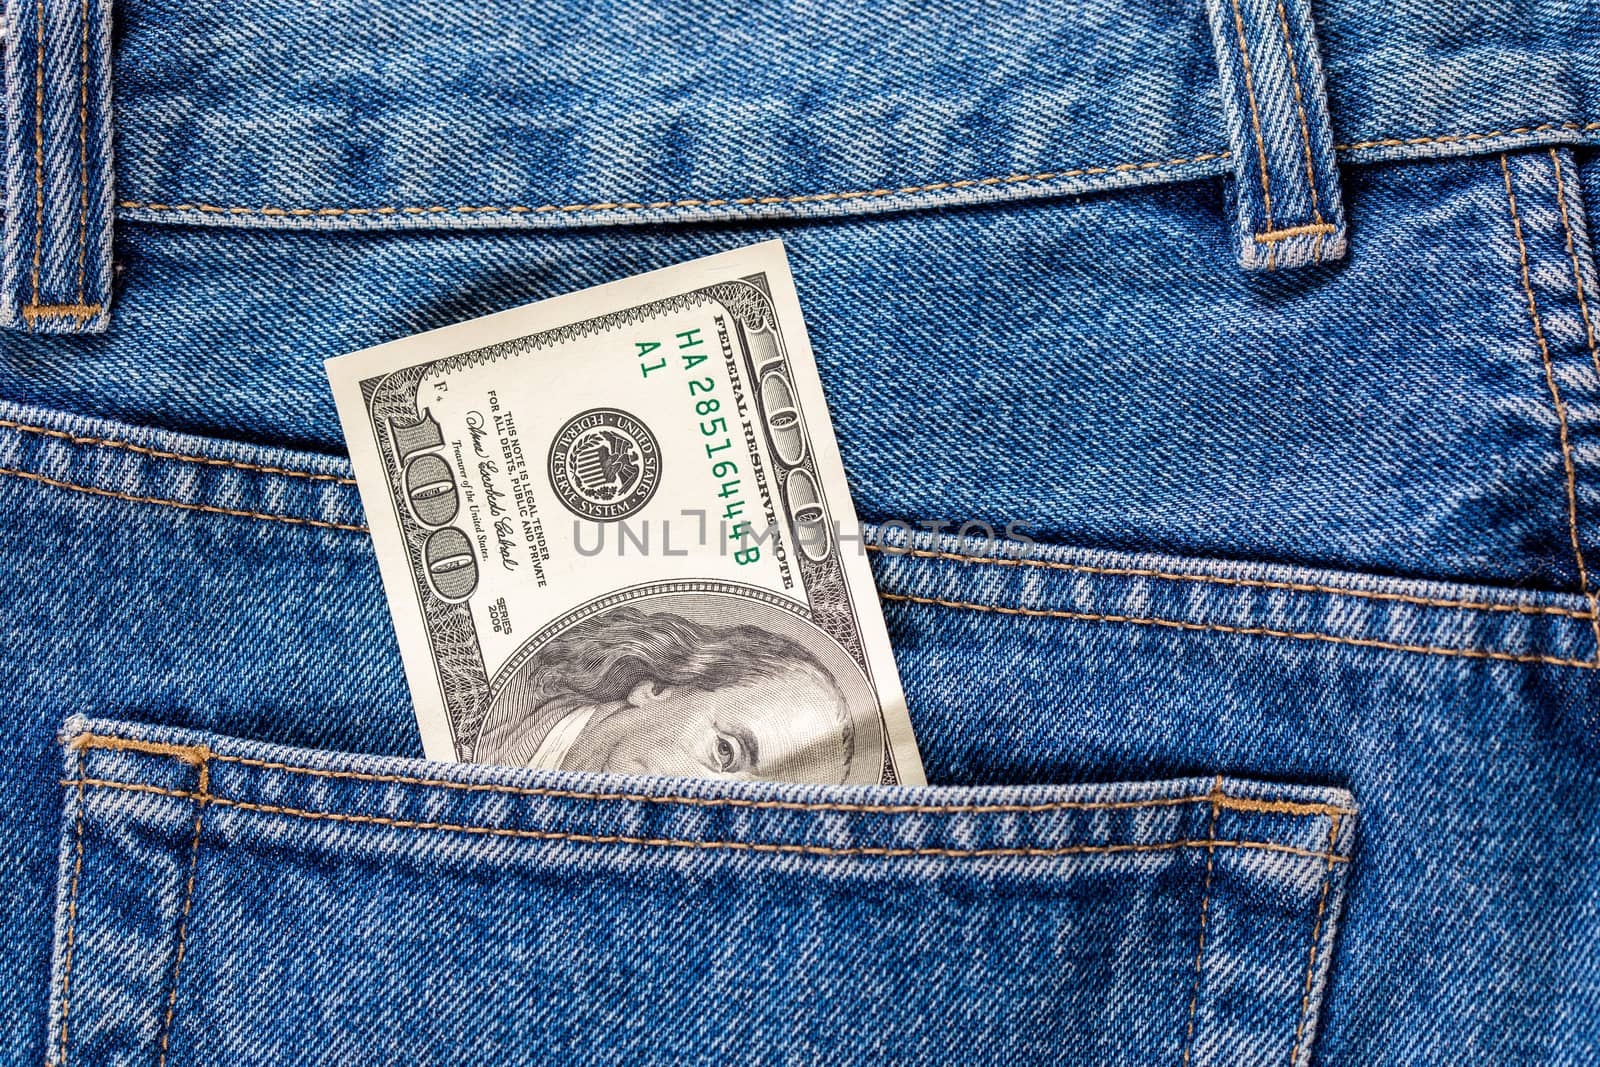 a hundred dollar banknote sticking out from rear jeans pocket by z1b